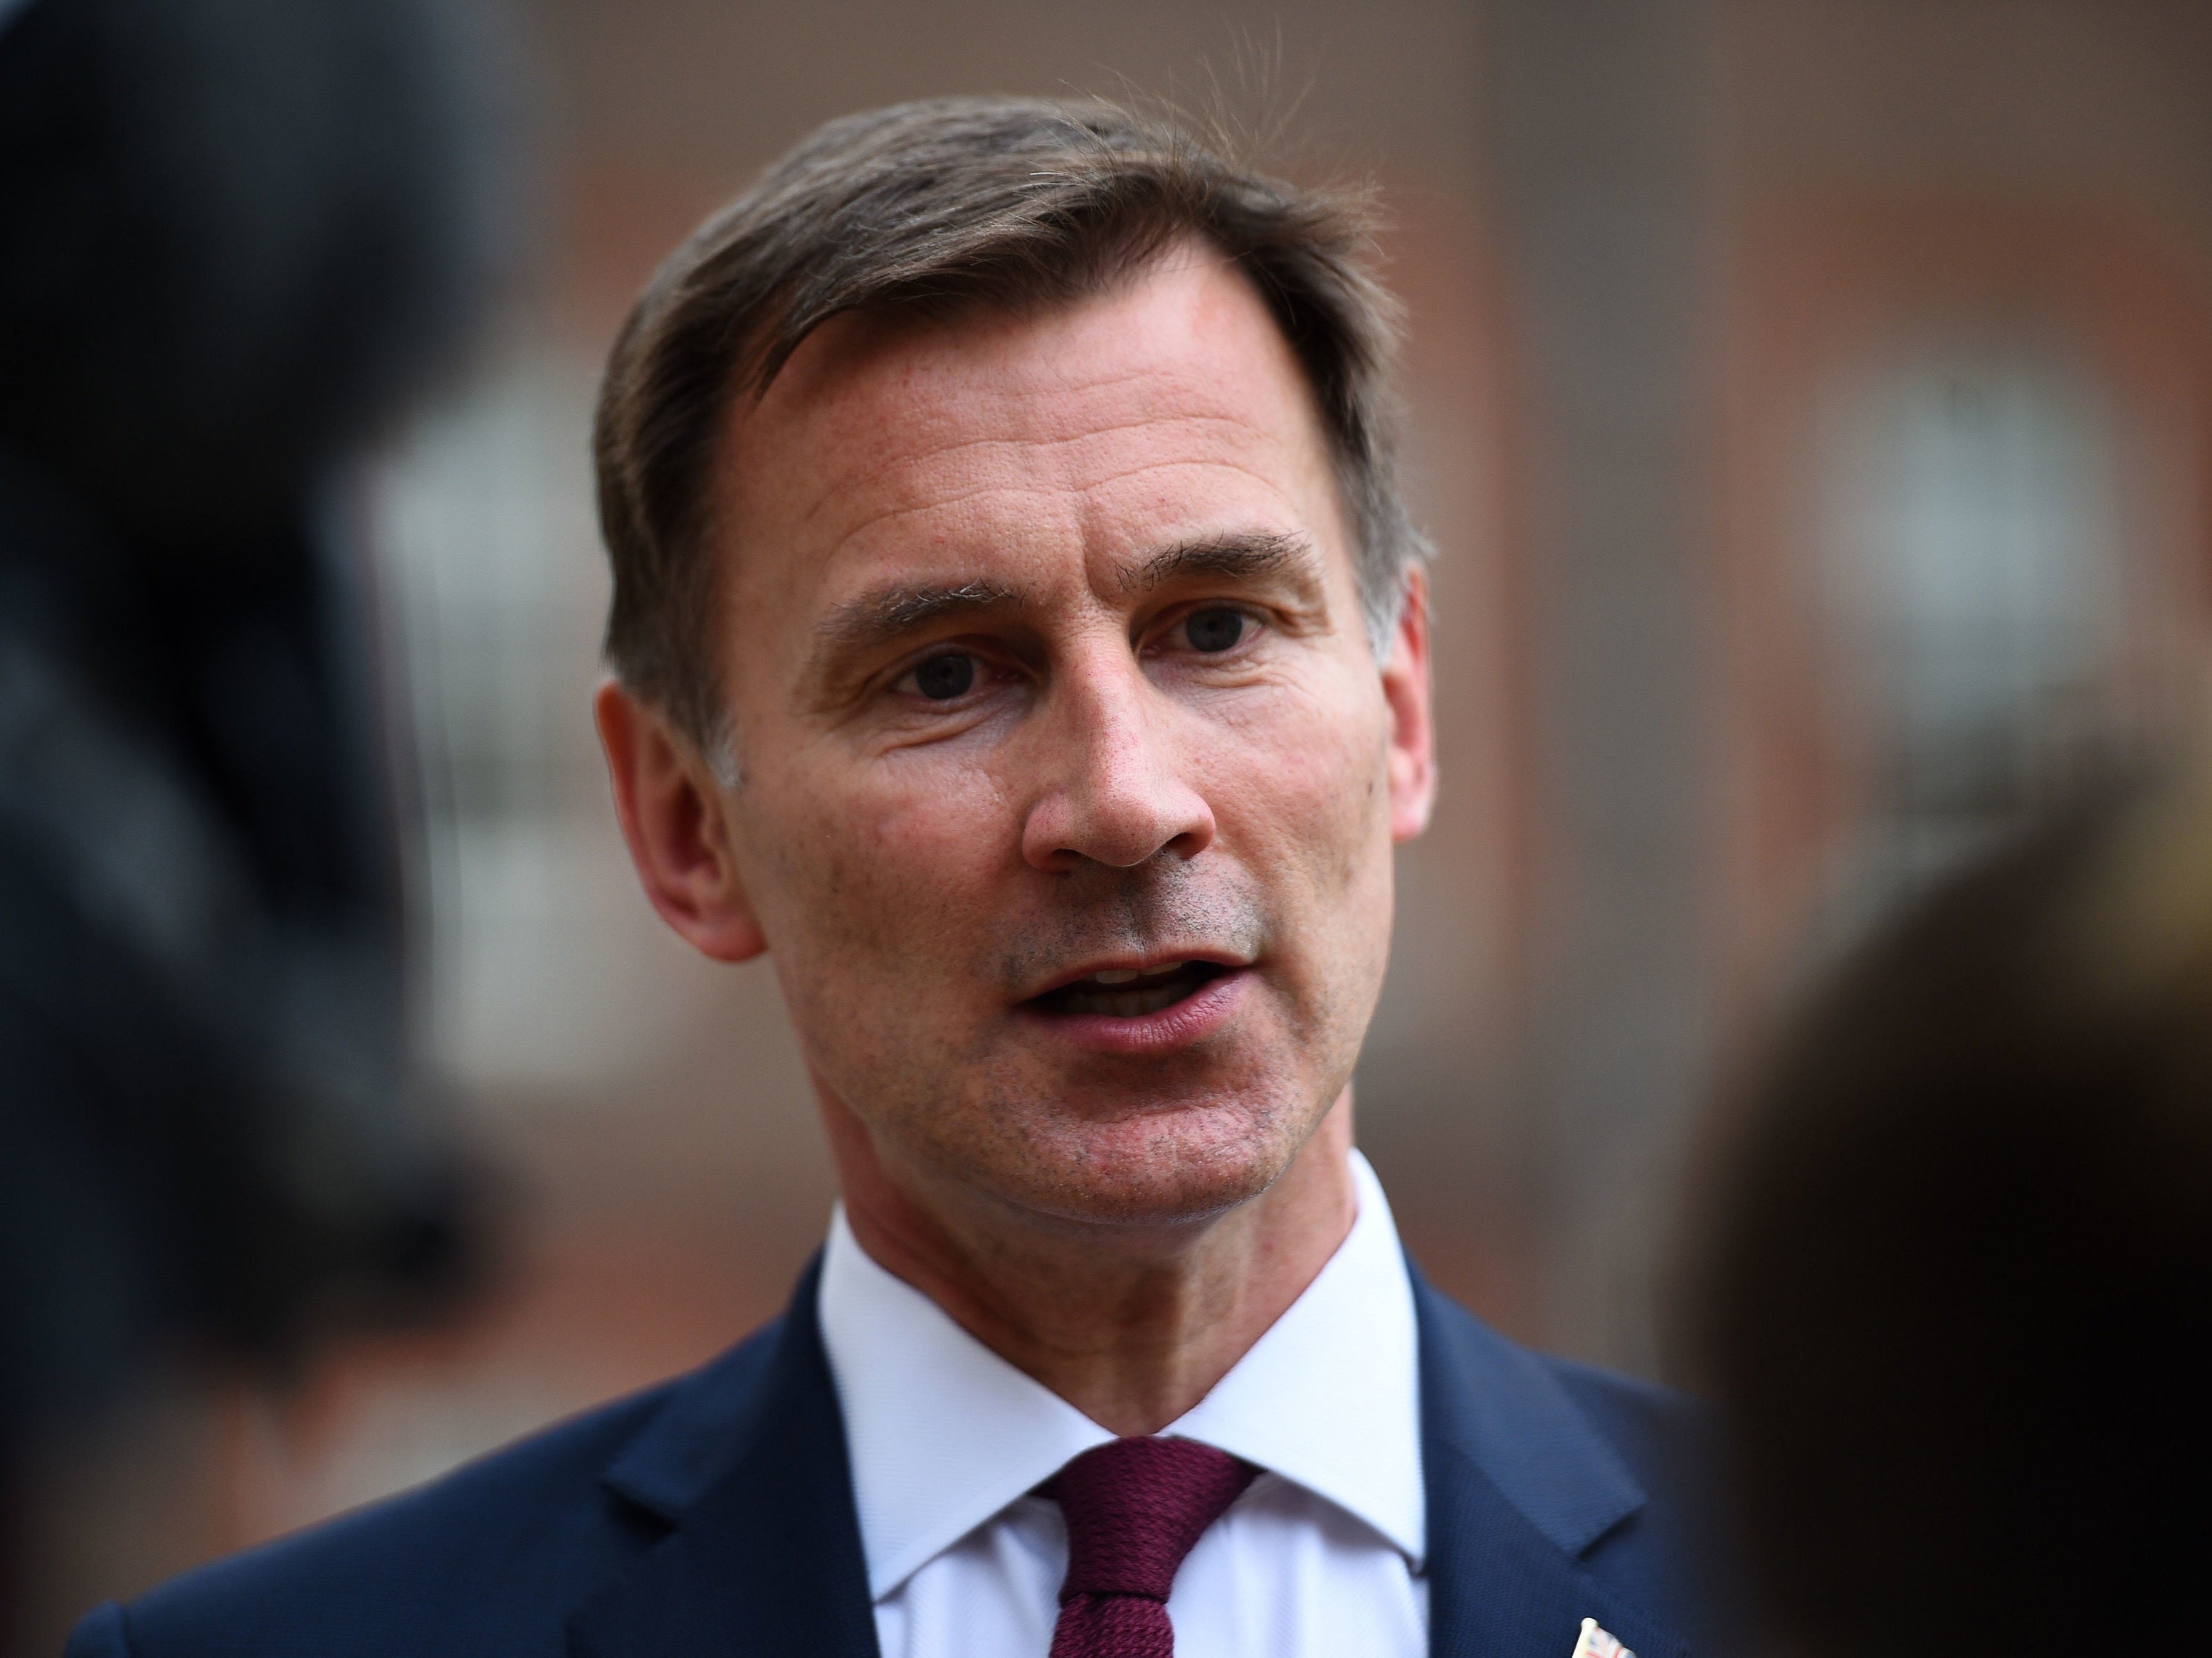 Former health secretary Jeremy Hunt has warned against lifting lockdown restrictions until coronavirus cases fall to 1,000 a day